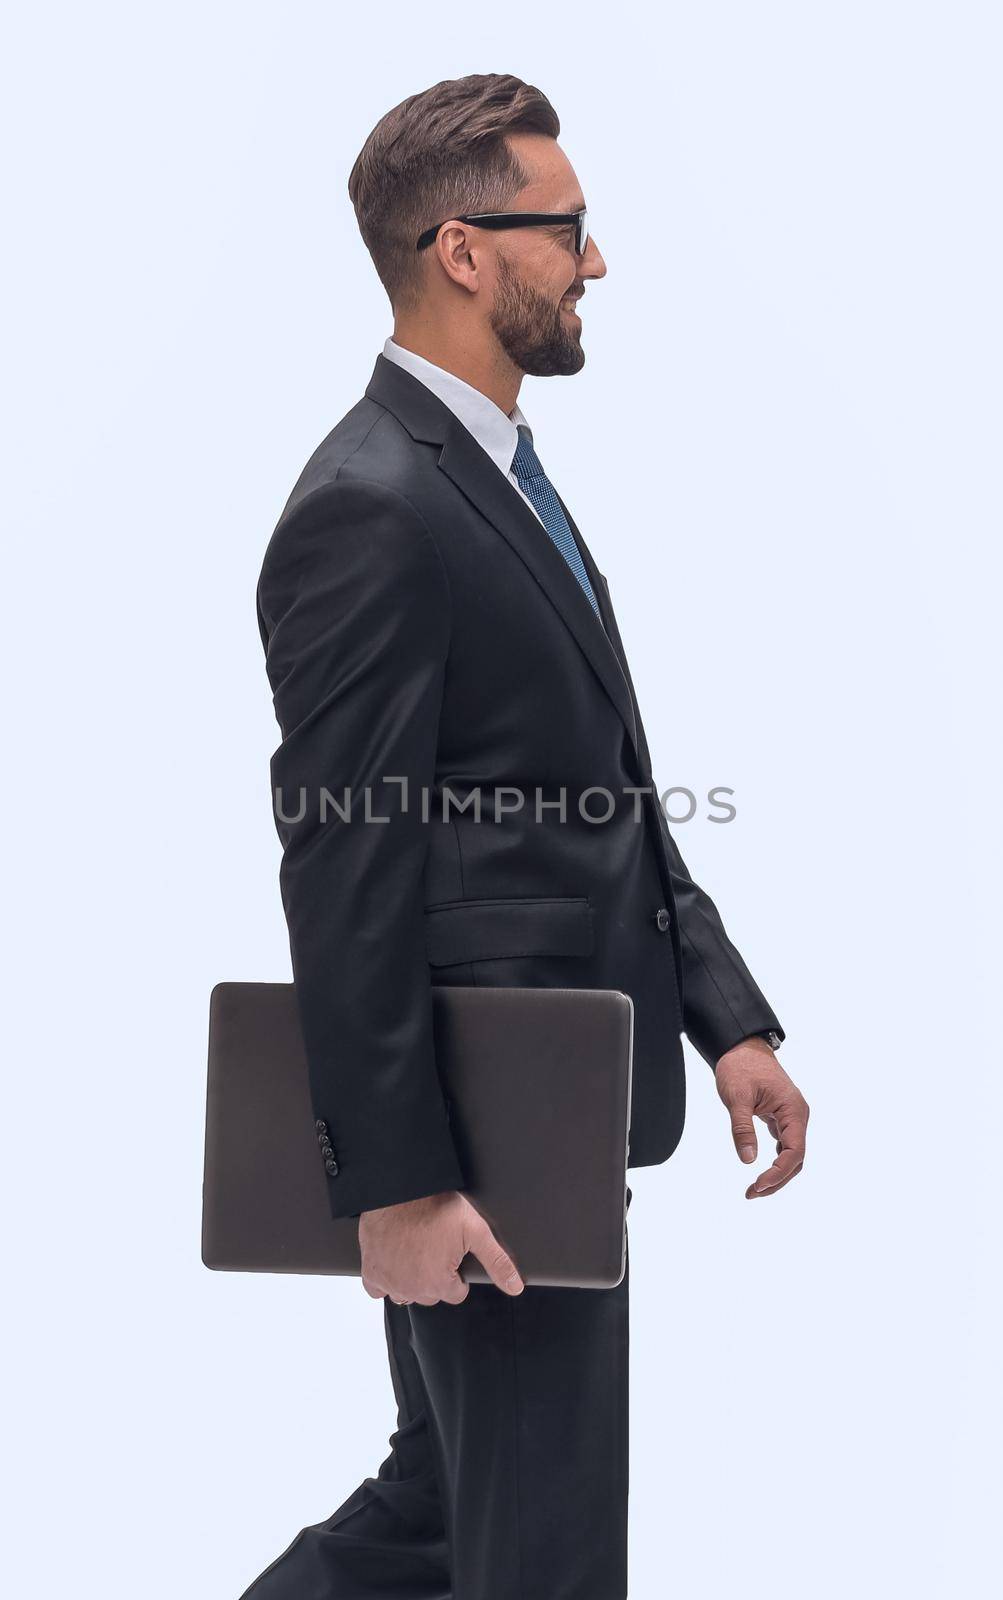 in full growth. successful businessman with laptop stepping forward. isolated on white background